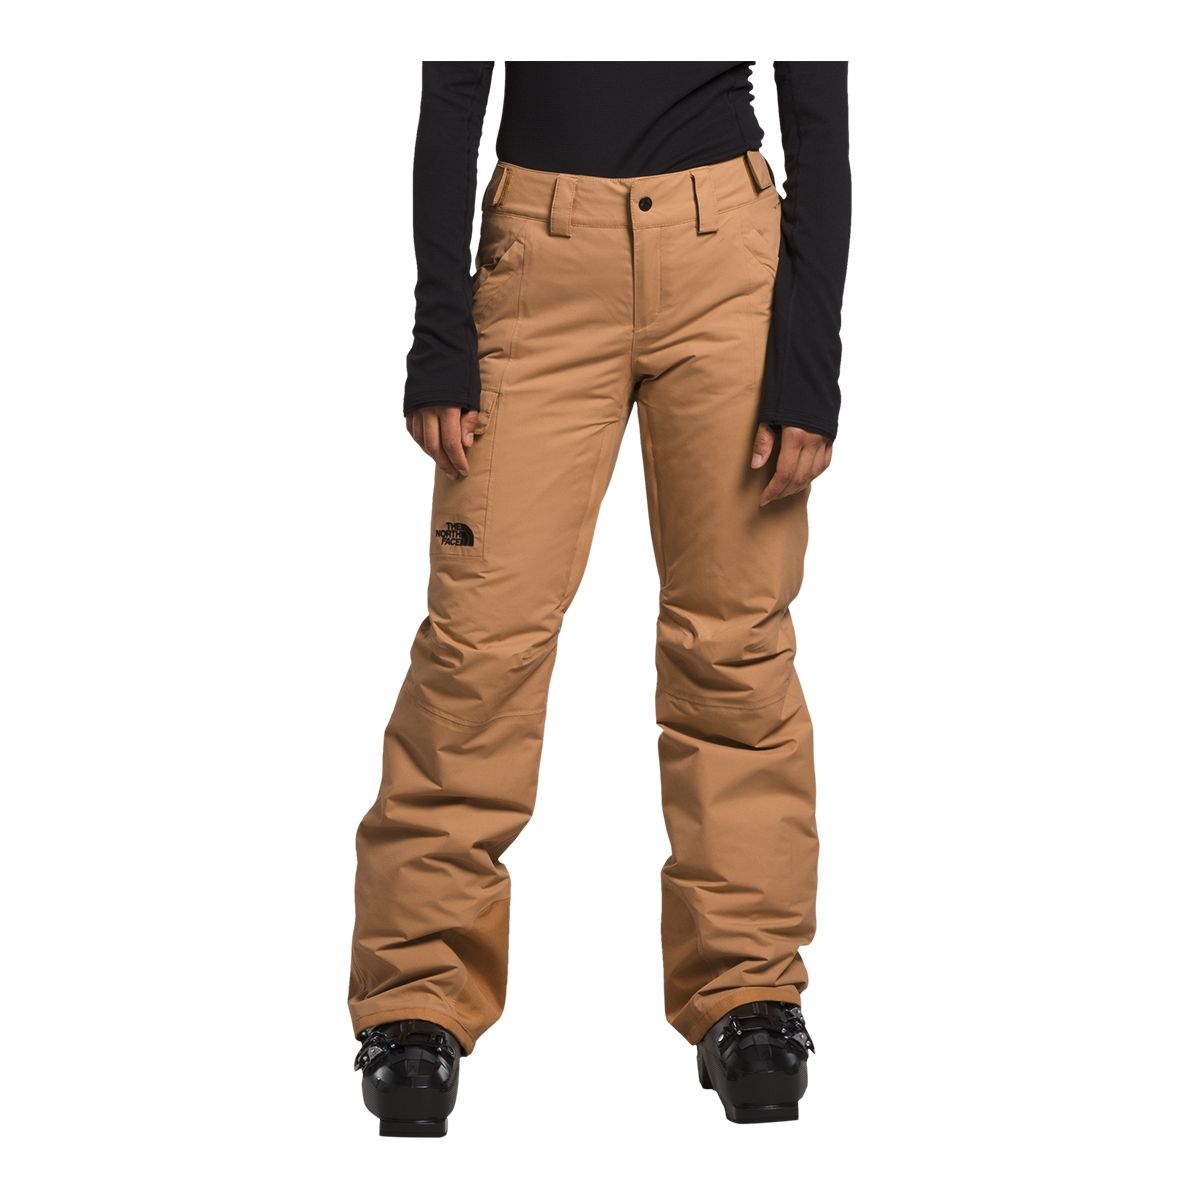 The North Face Women's Winter Essential Leggings, Pants, Hiking, Outdoor